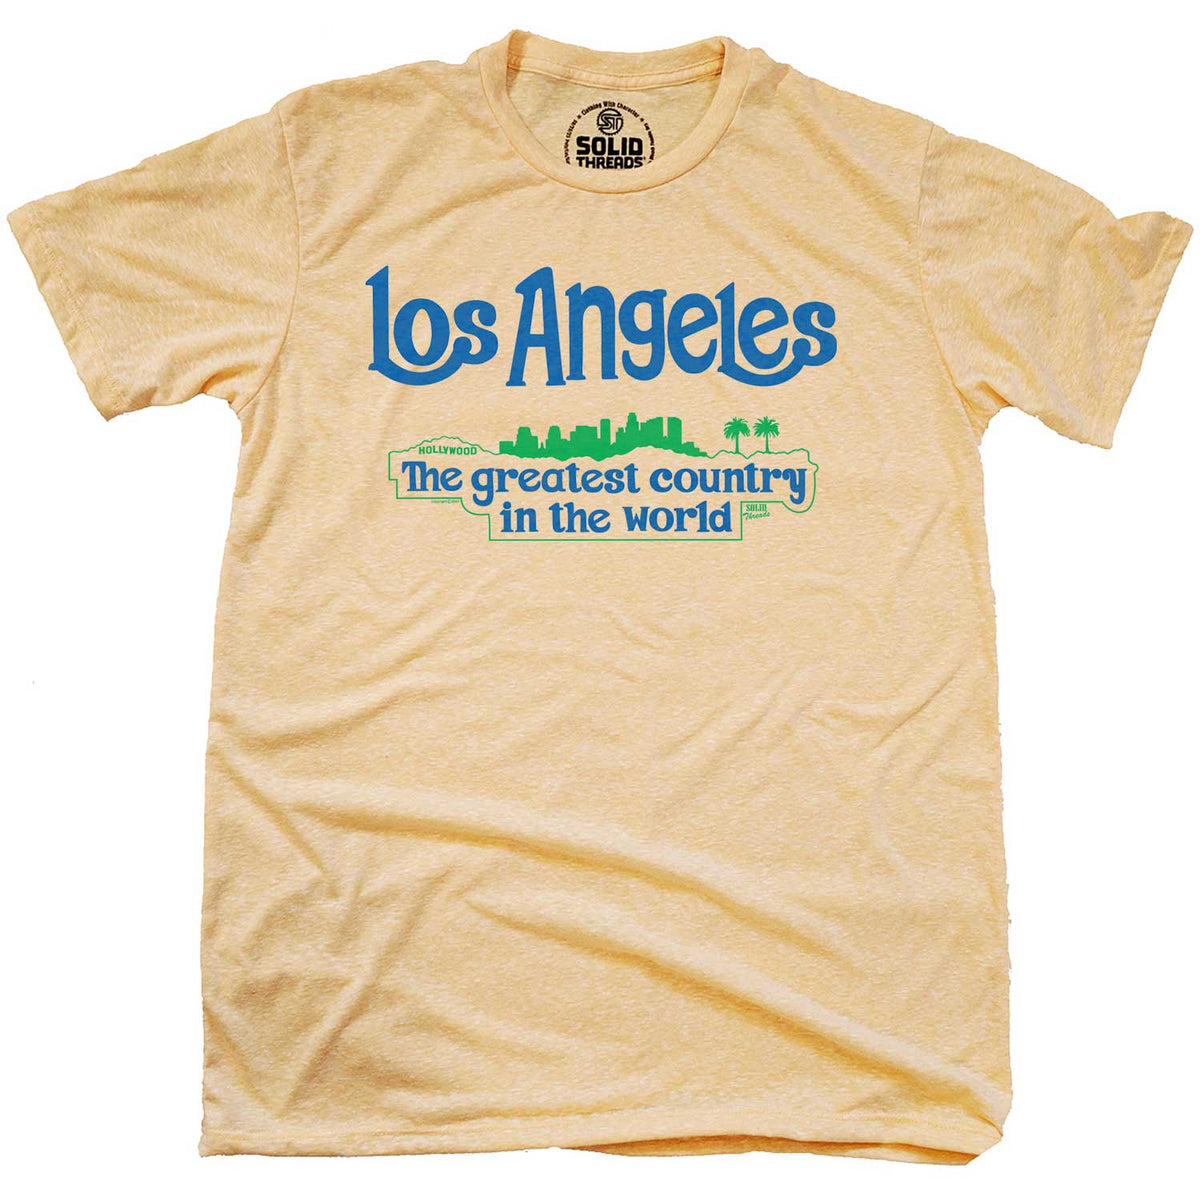 Men&#39;s Los Angeles The Greatest Country Retro Graphic T-Shirt | Funny California Tee | Solid Threads